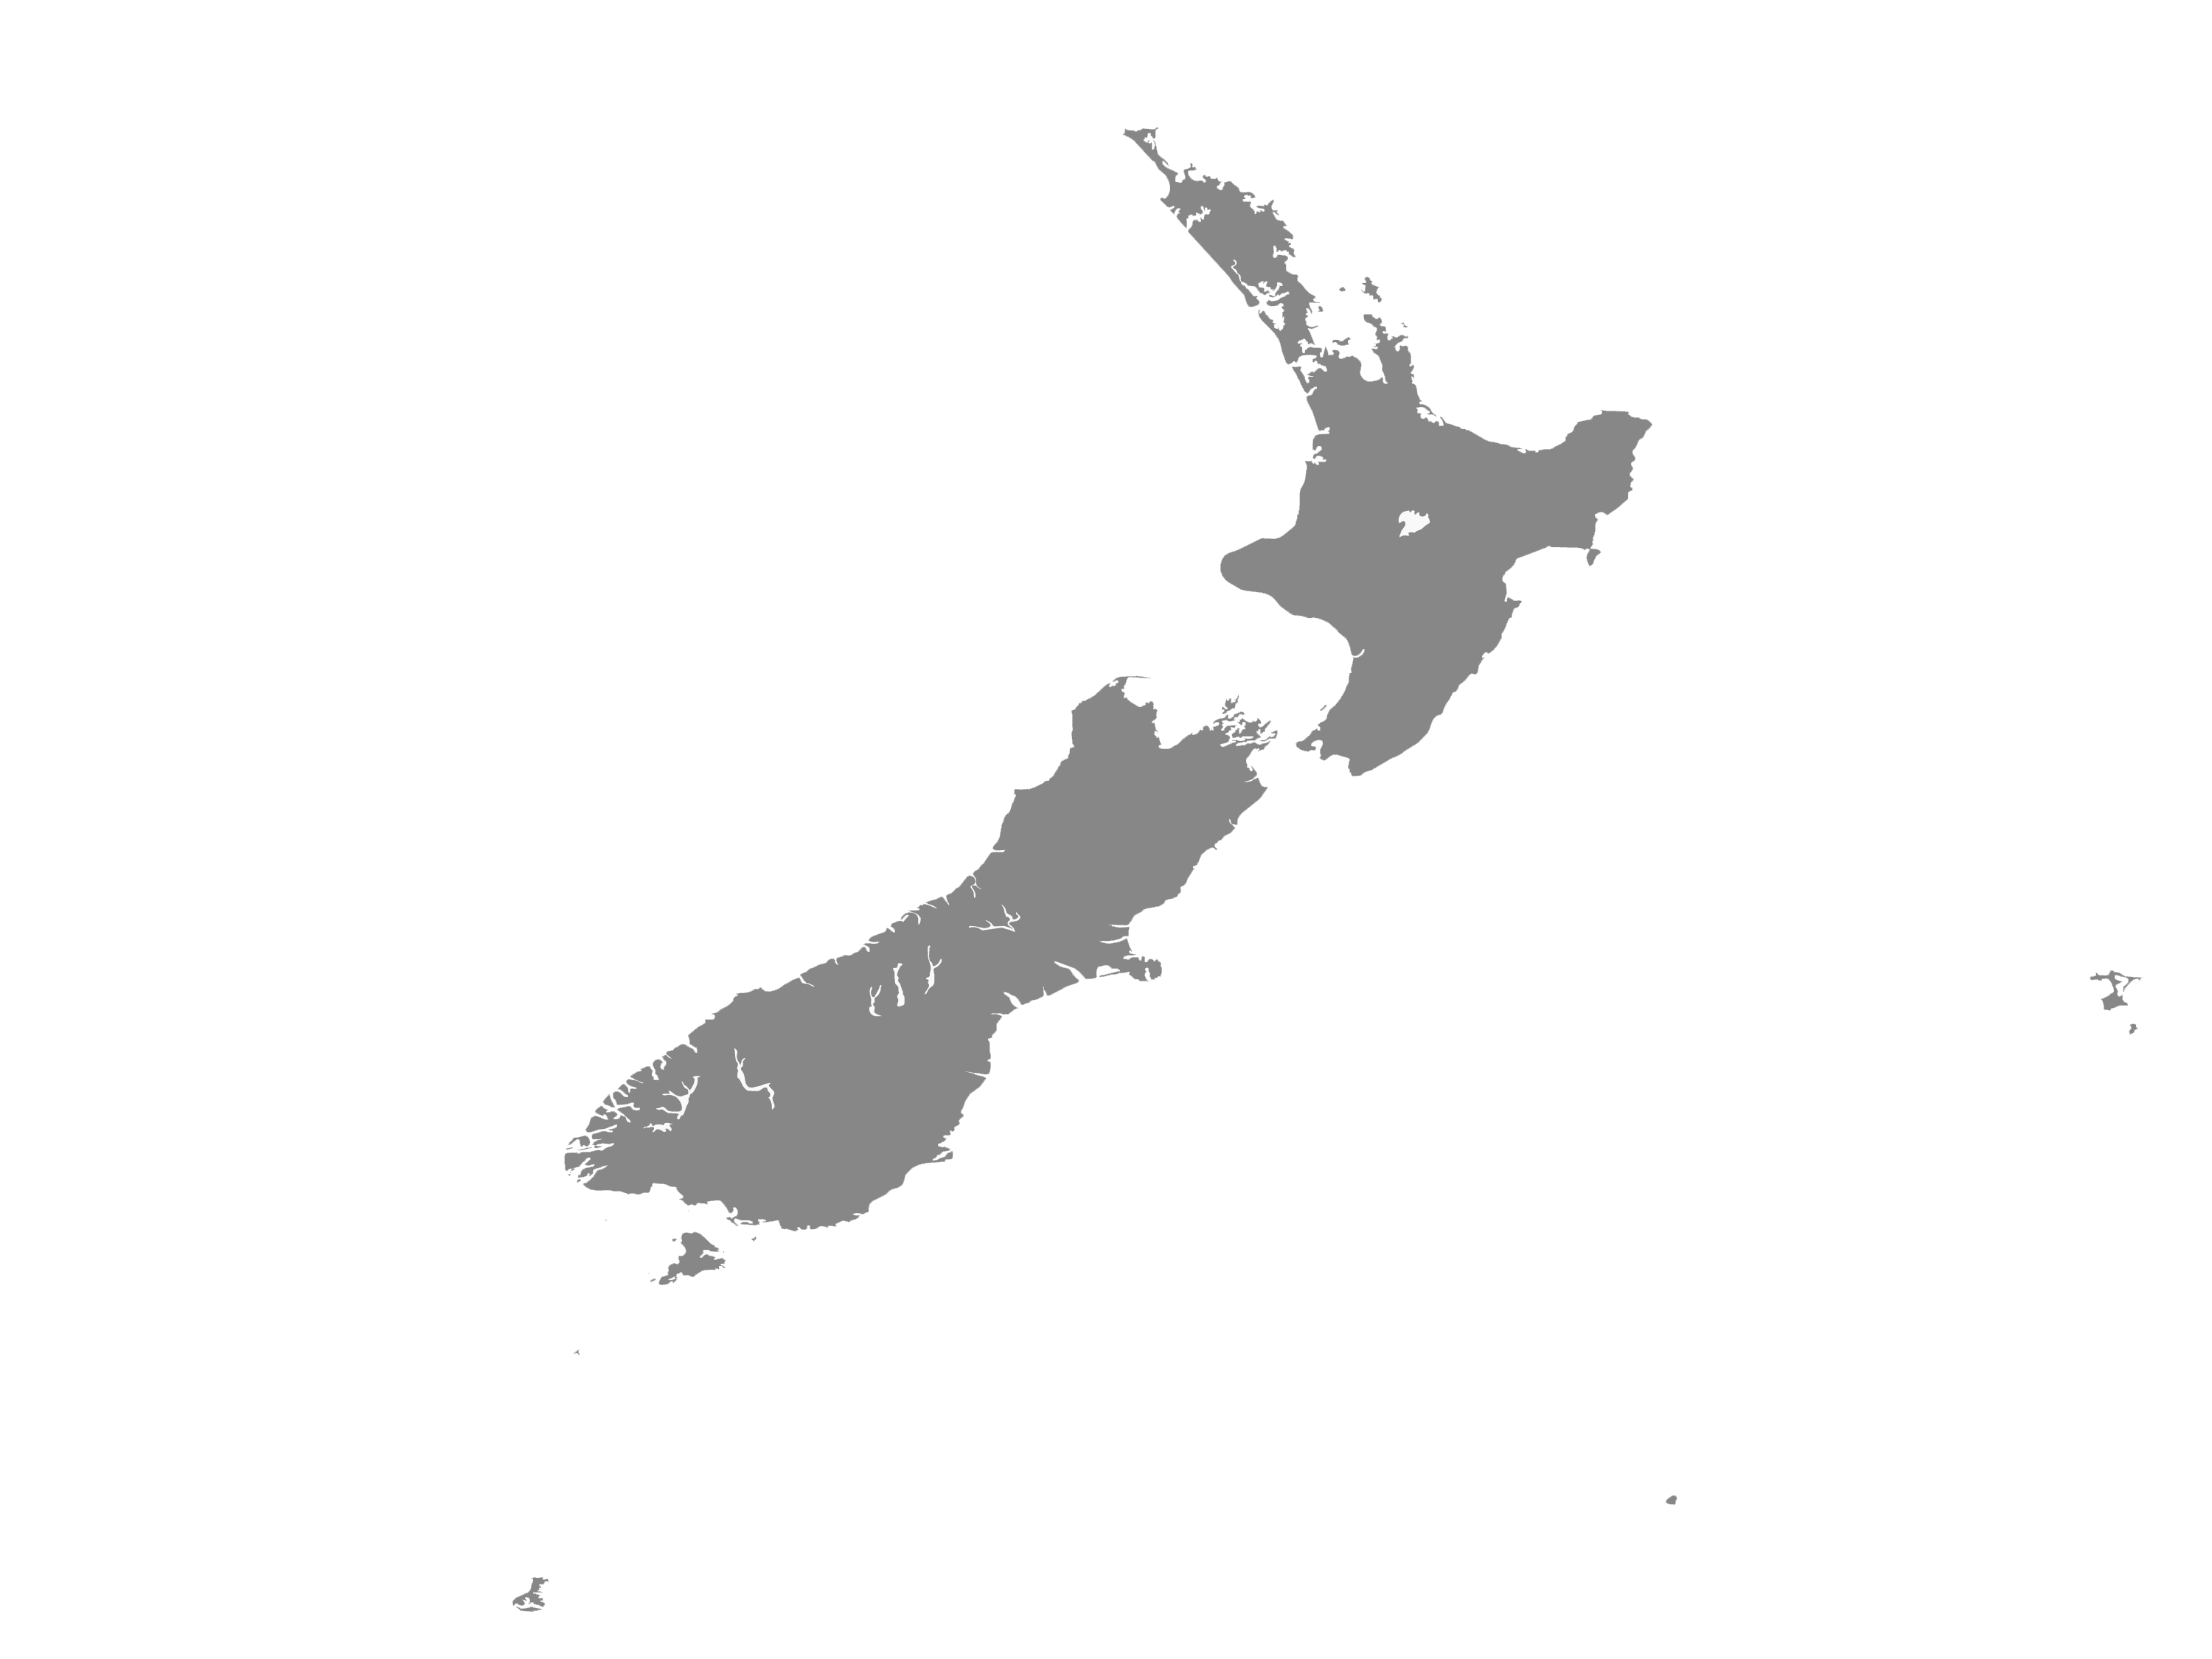 New Zealand - Single Color by FreeVectorMaps.com